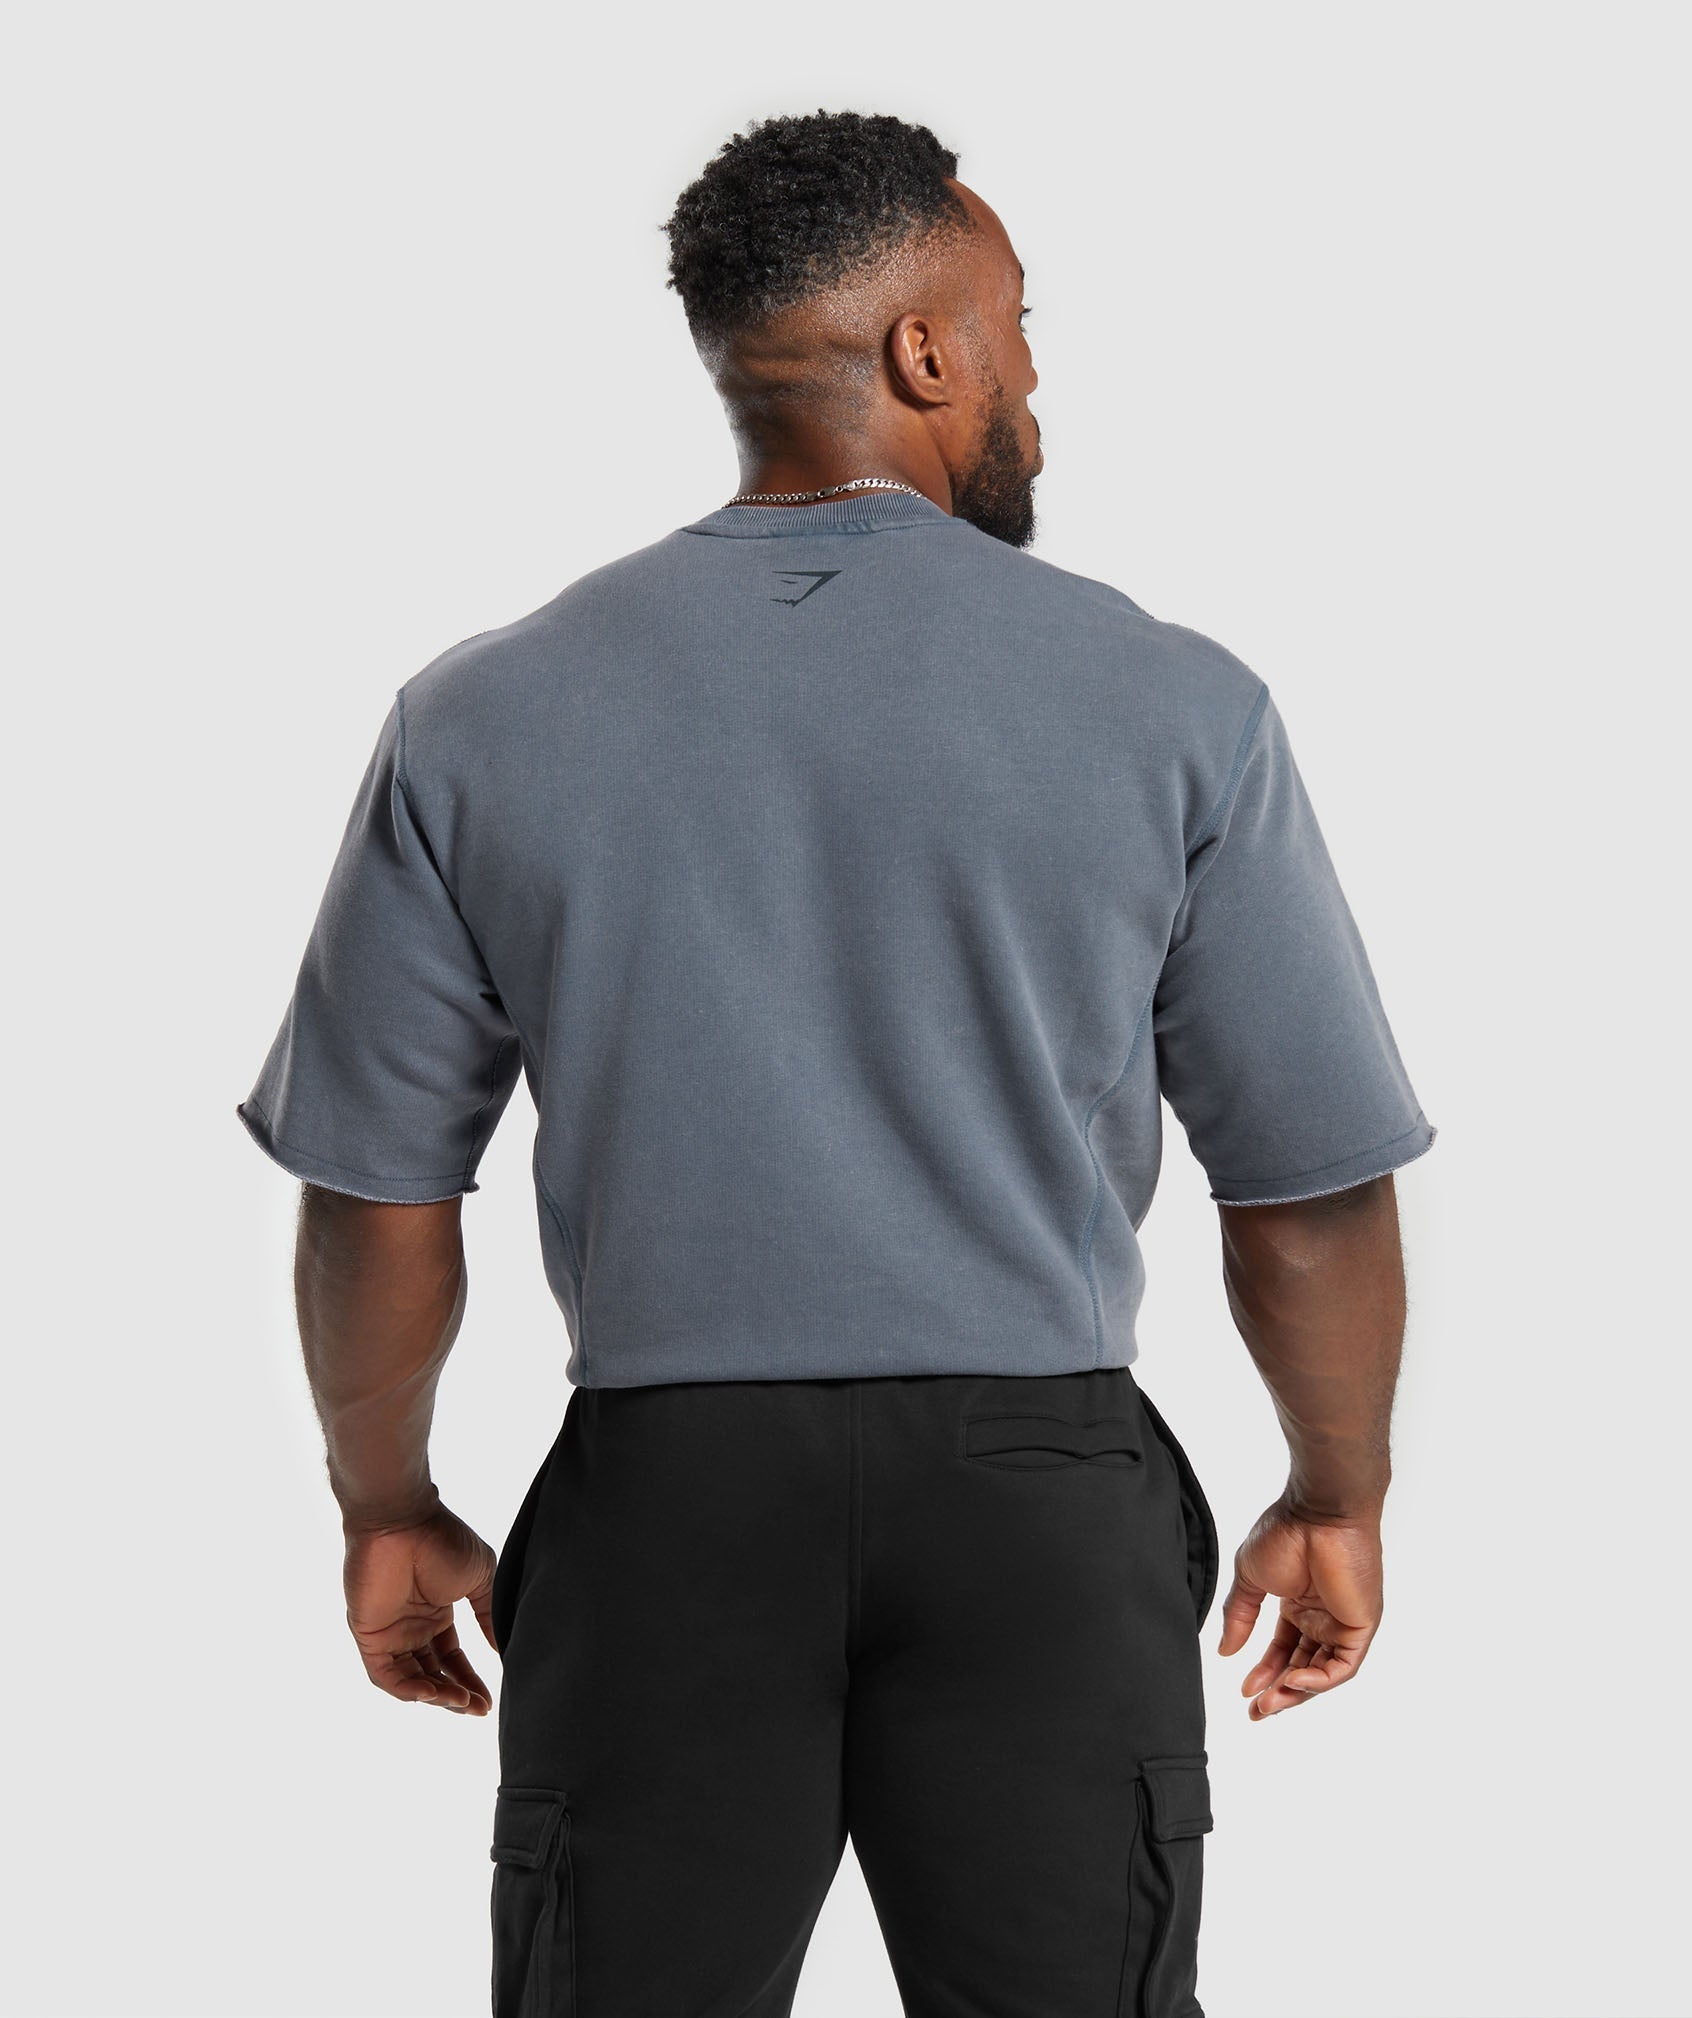 7 Best Workout Clothing And More From The  Big Style Sale - Men's  Journal